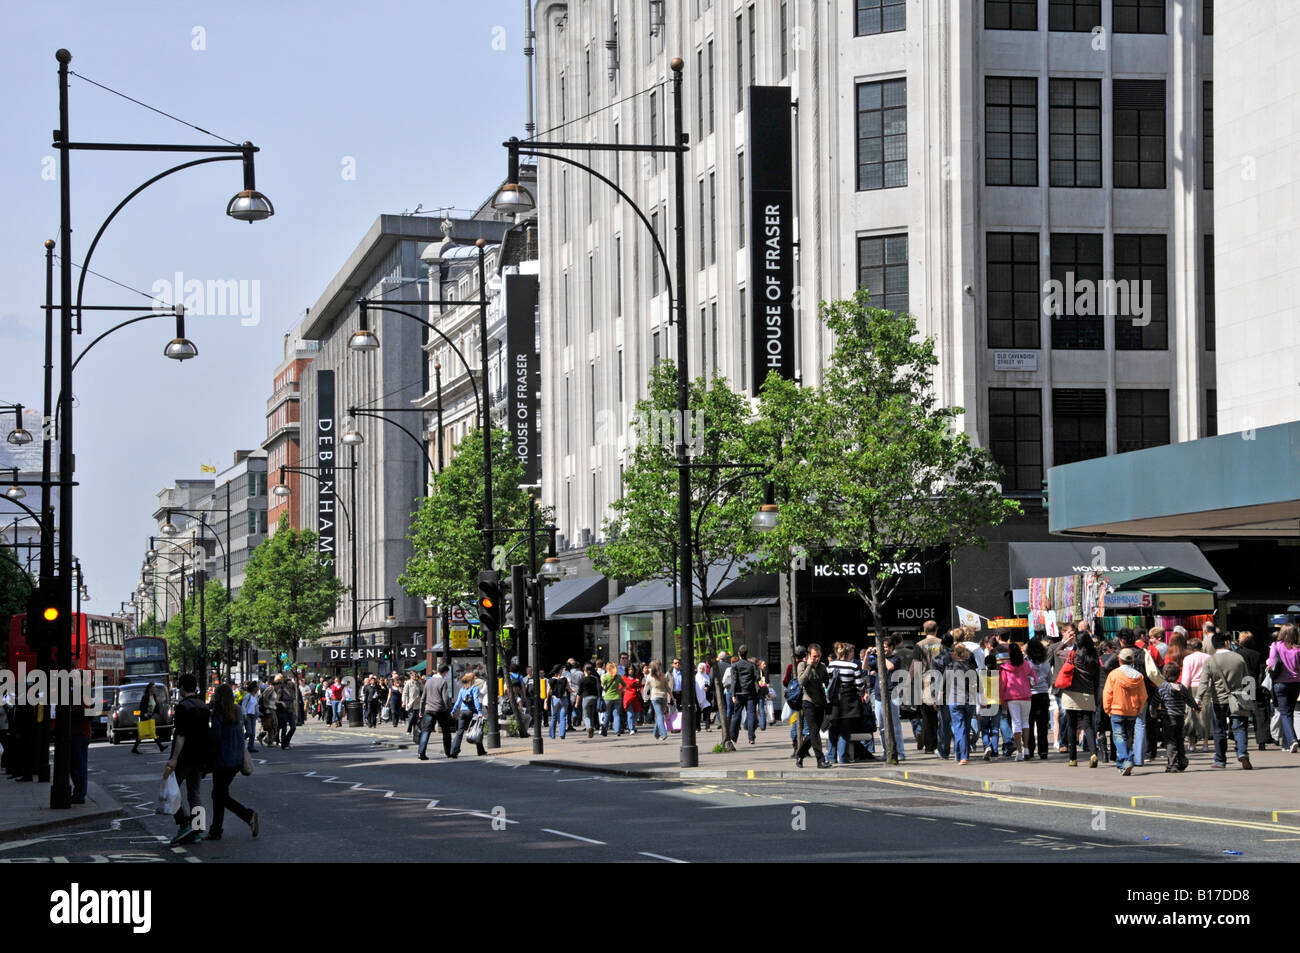 London West End Oxford Street shopping area Stock Photo